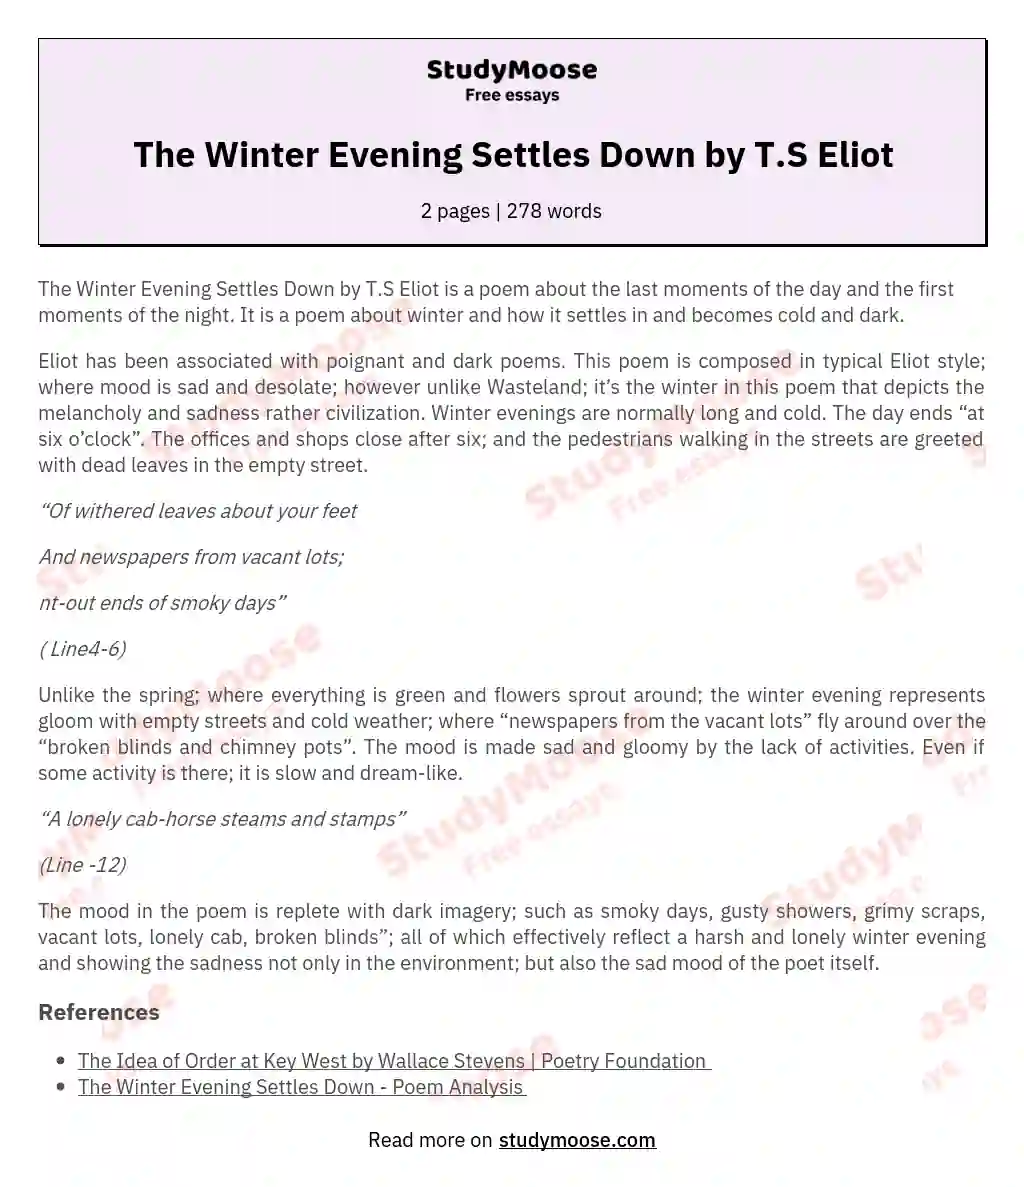 The Winter Evening Settles Down by T.S Eliot essay